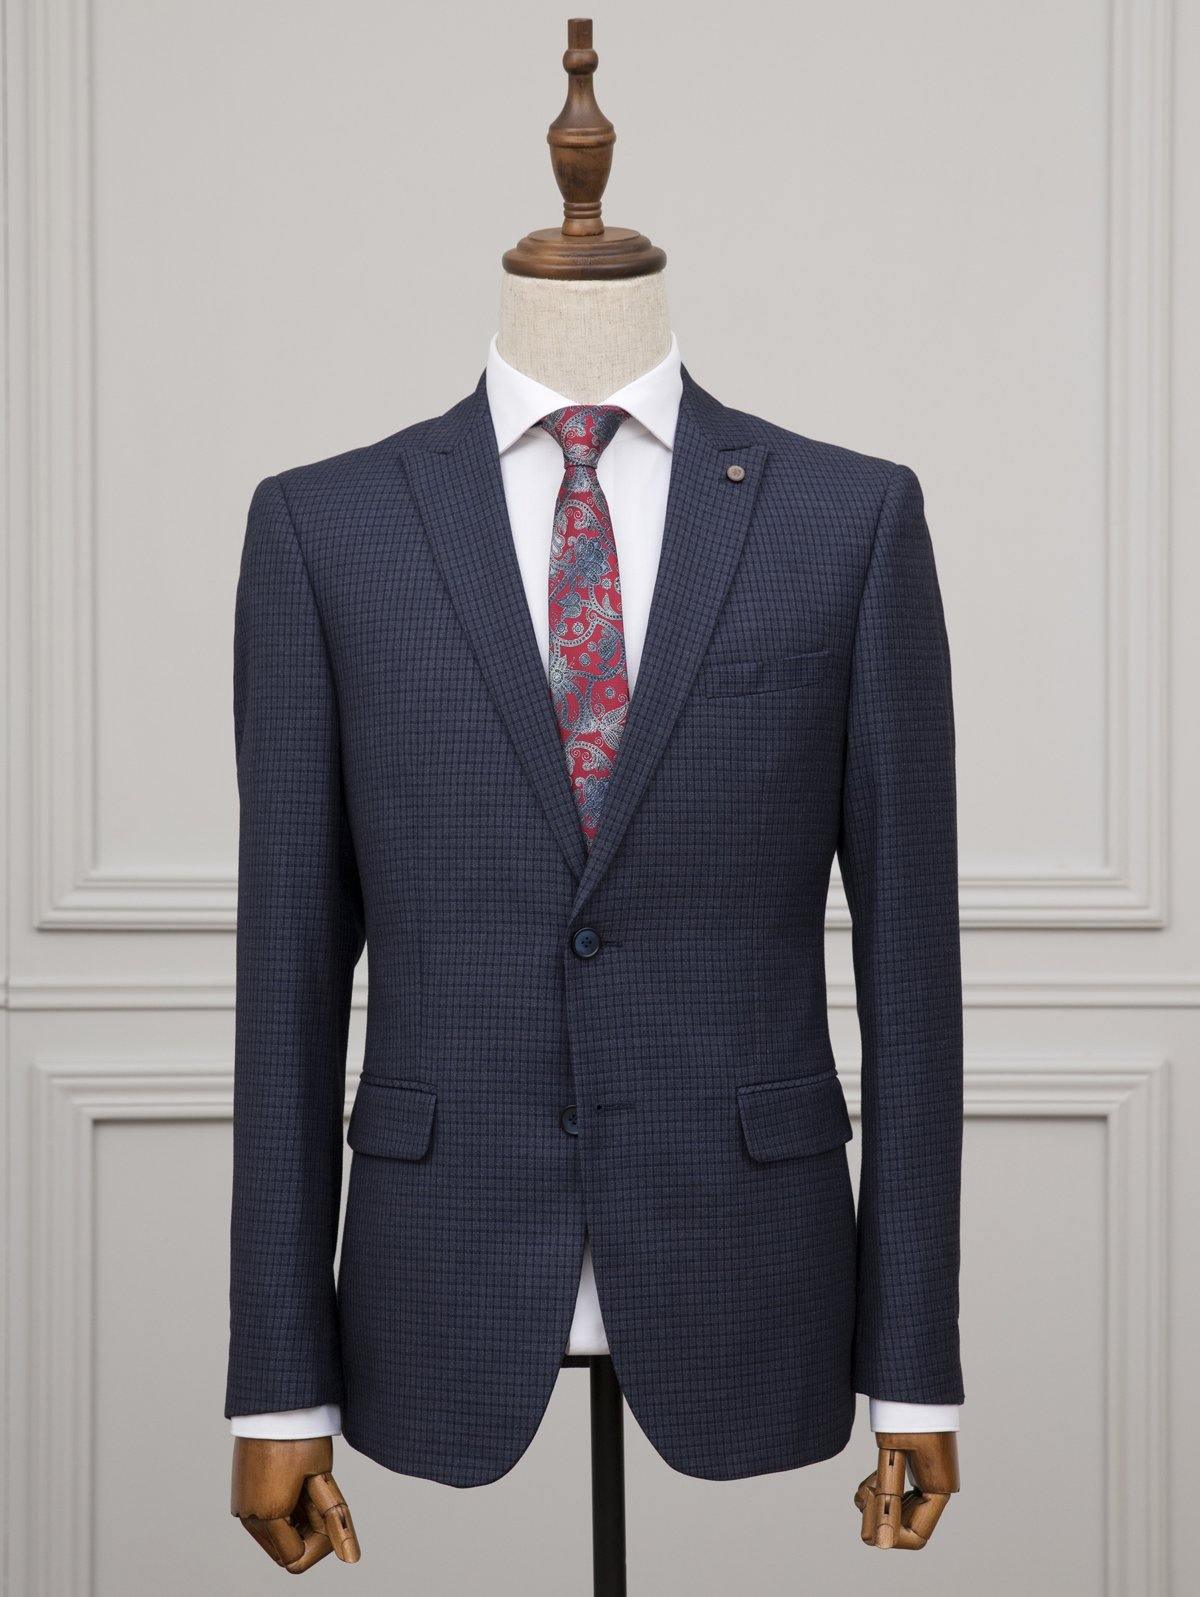 2 PIECE SUIT BLUE GREY at Charcoal Clothing